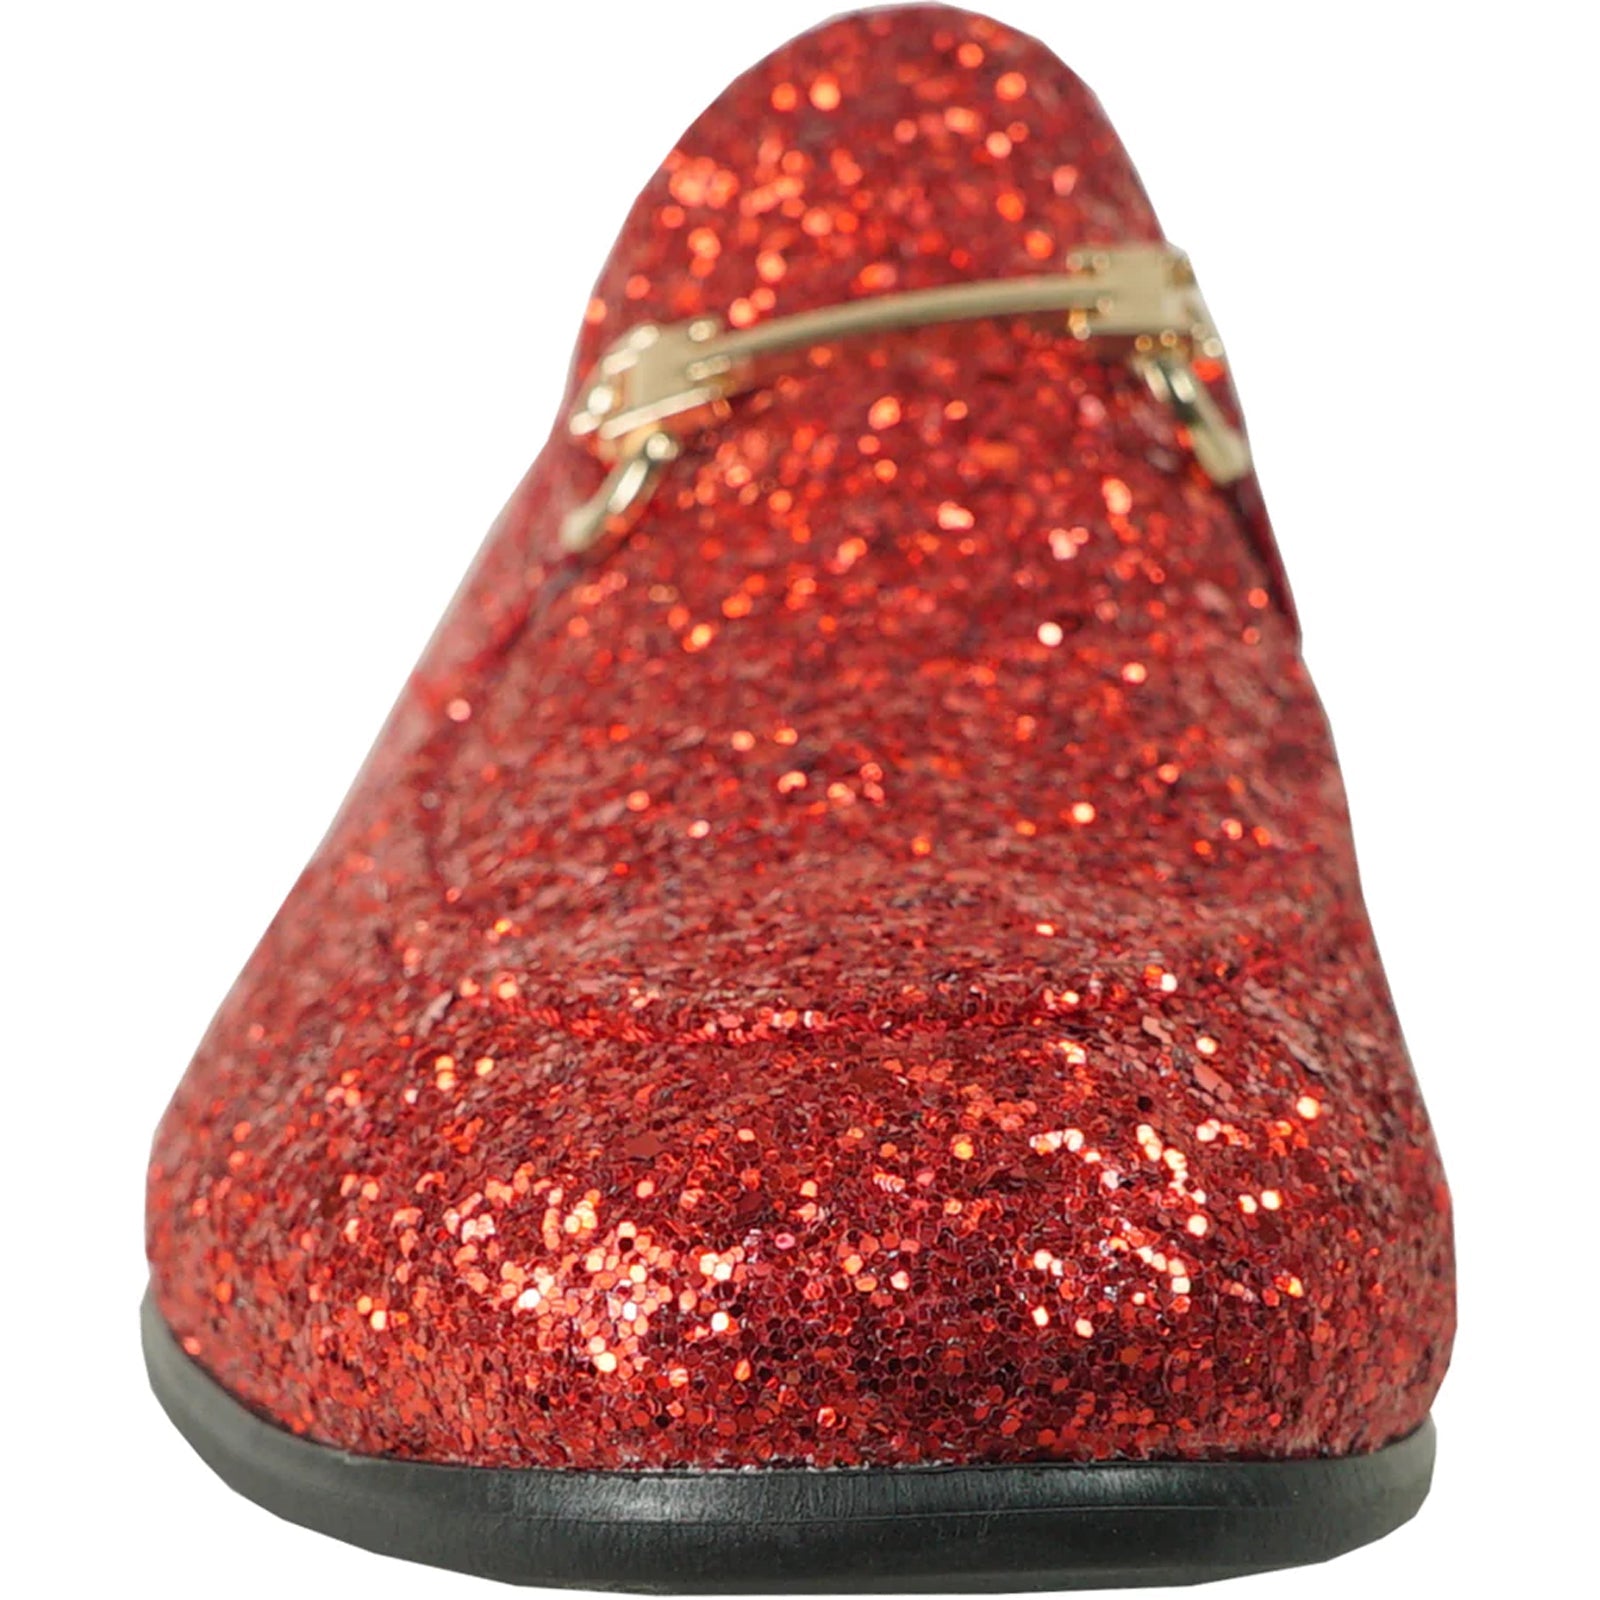 Red Sequin Prom Tuxedo Loafers - Modern Men's Glitter Buckle Shoes